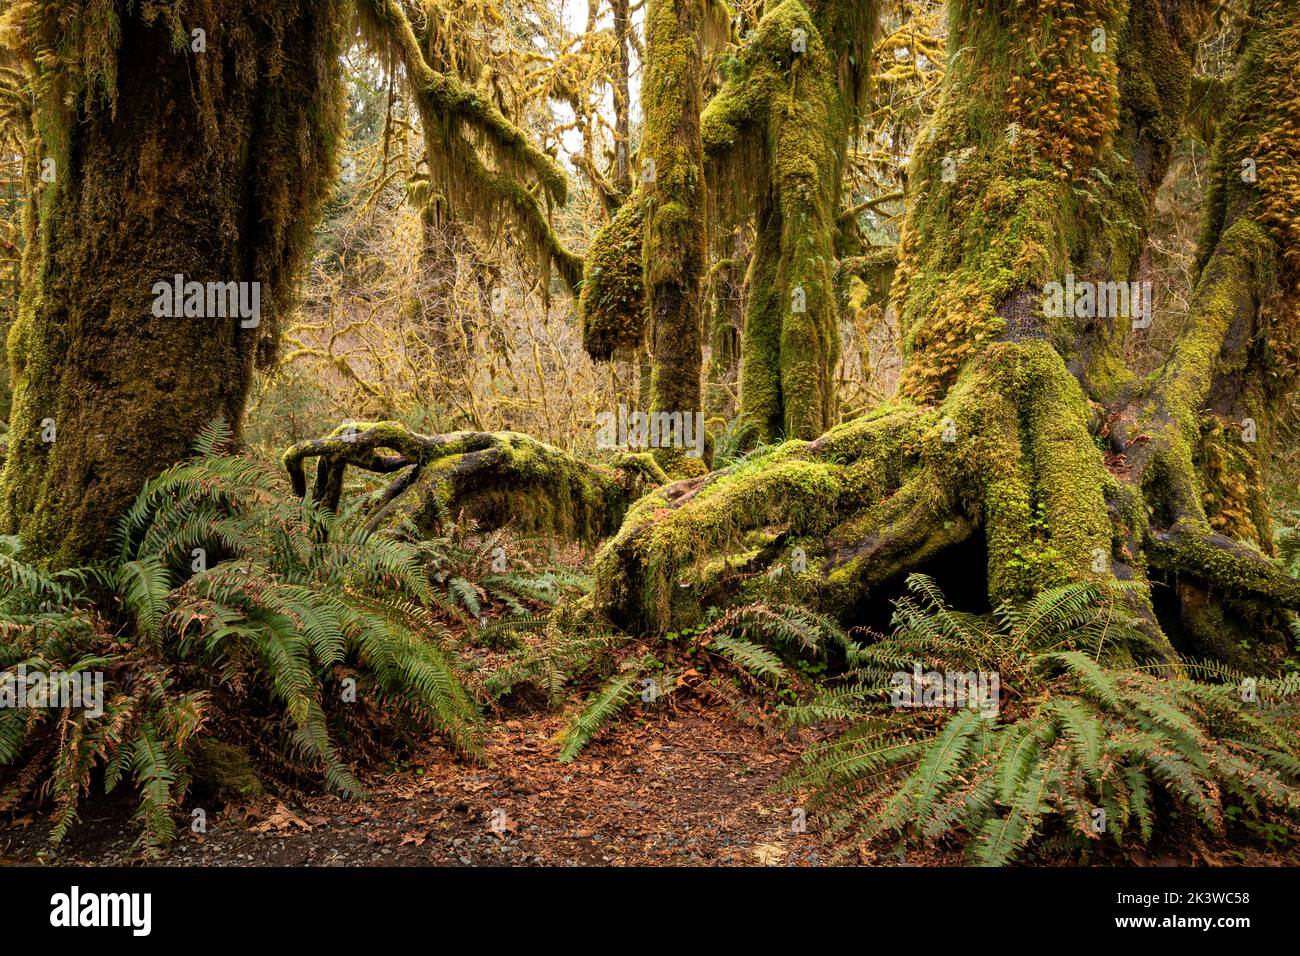 WA22098-00...WASHINGTON - Maple trees covered with moss  in the Hall of Mosses, part of the Hoh Rain Forest , In Olympic National Park. Stock Photo